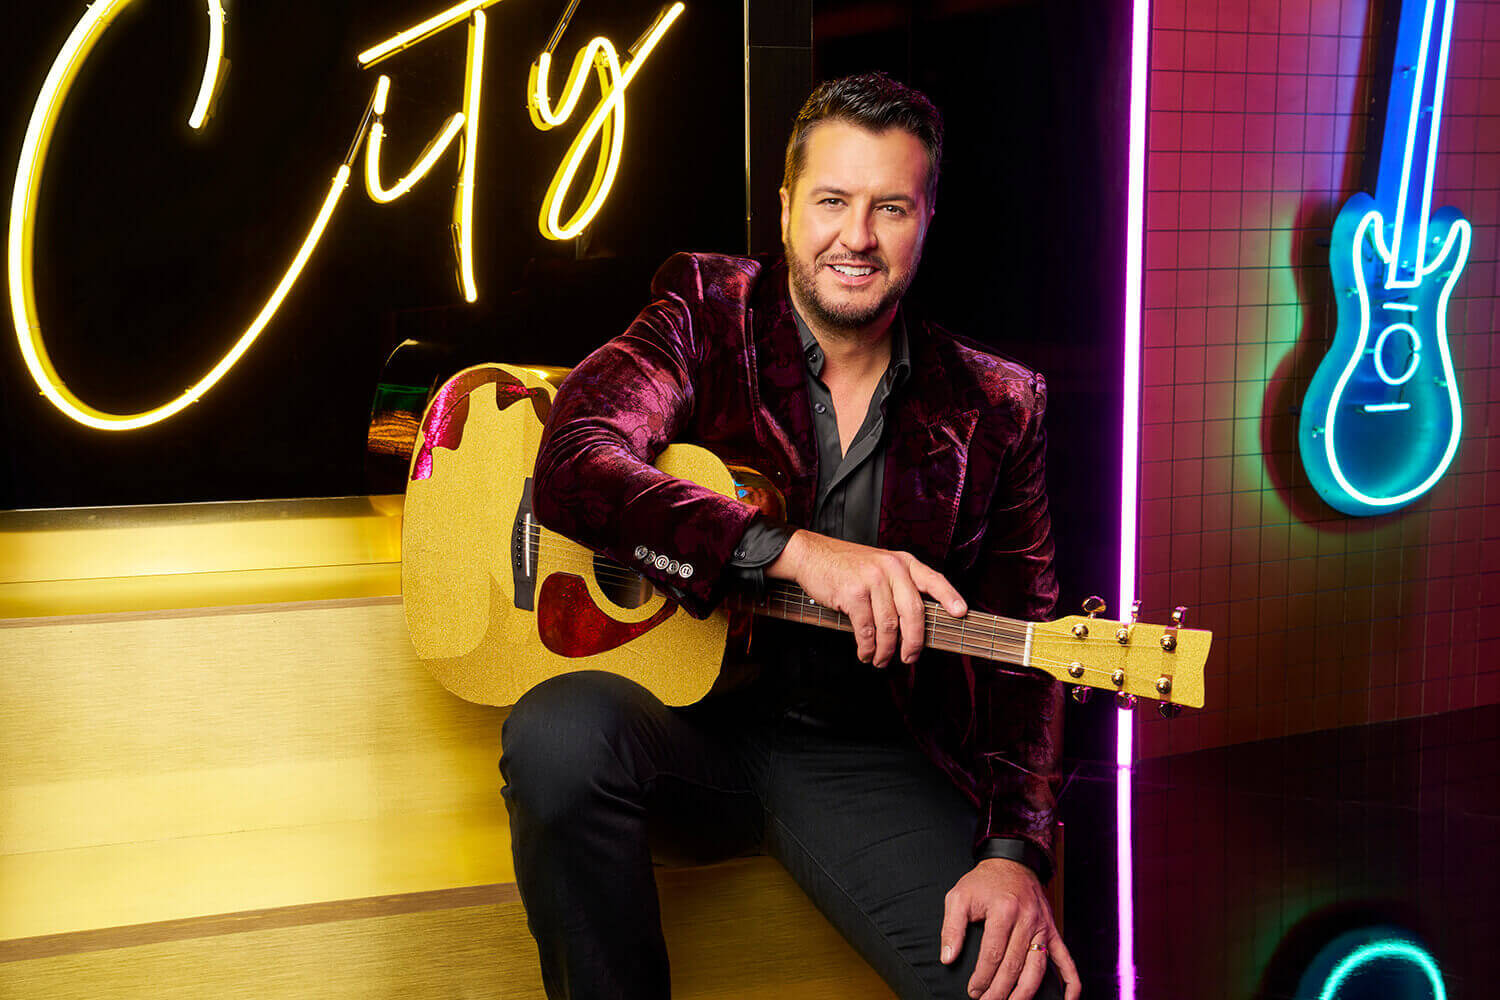 American Idol judge Luke Bryan sits on a yellow bench with a guitar on his knee and smiles